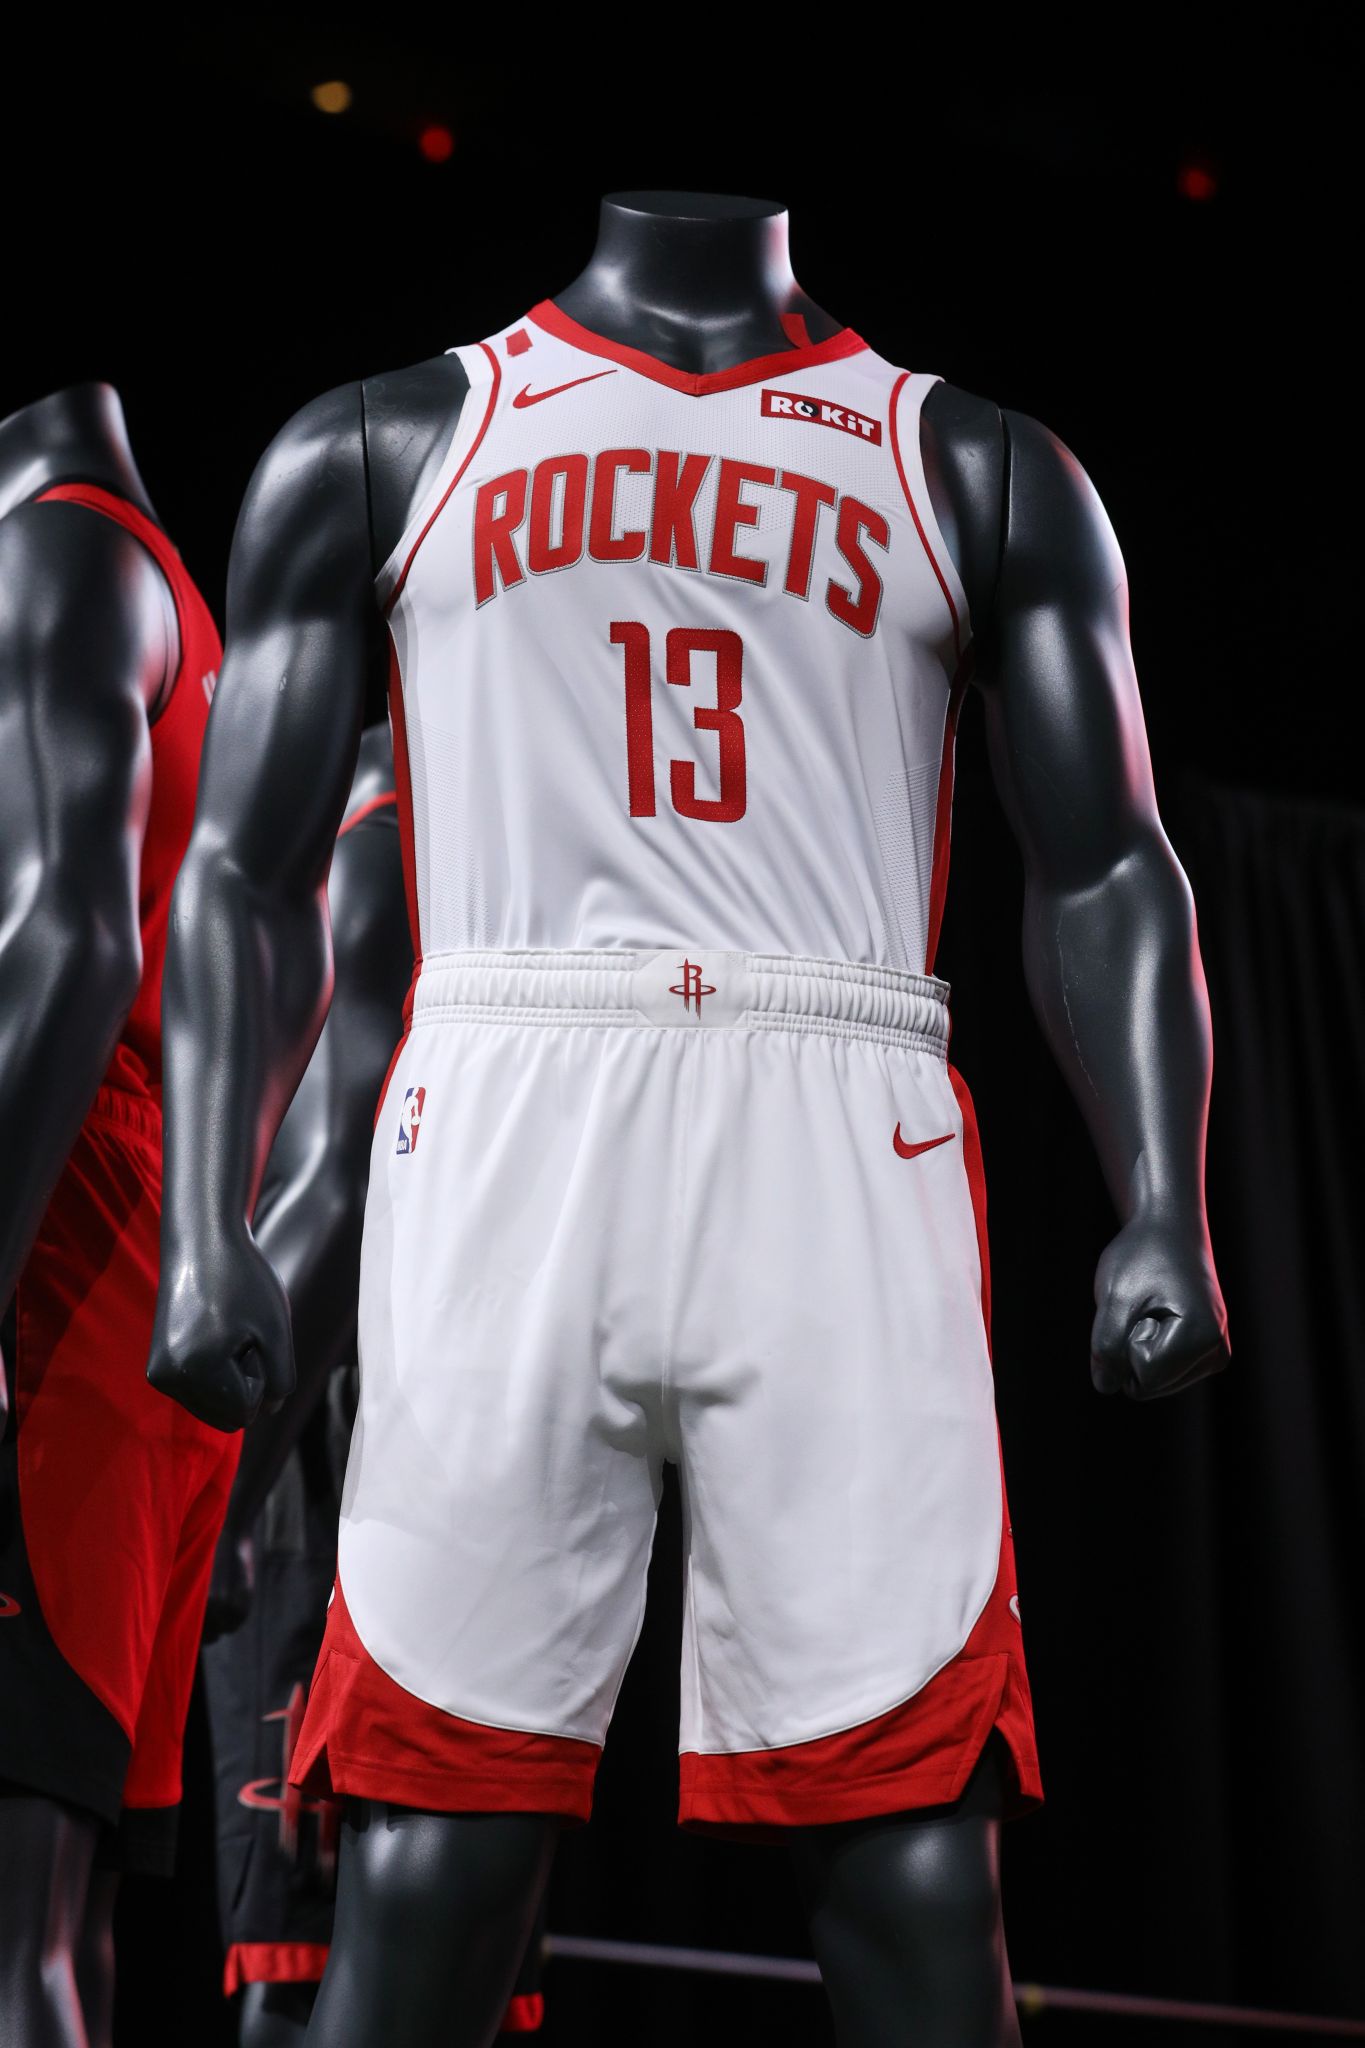 With Rockets unveiling new uniforms, here's how Rockets jerseys have changed  in the past